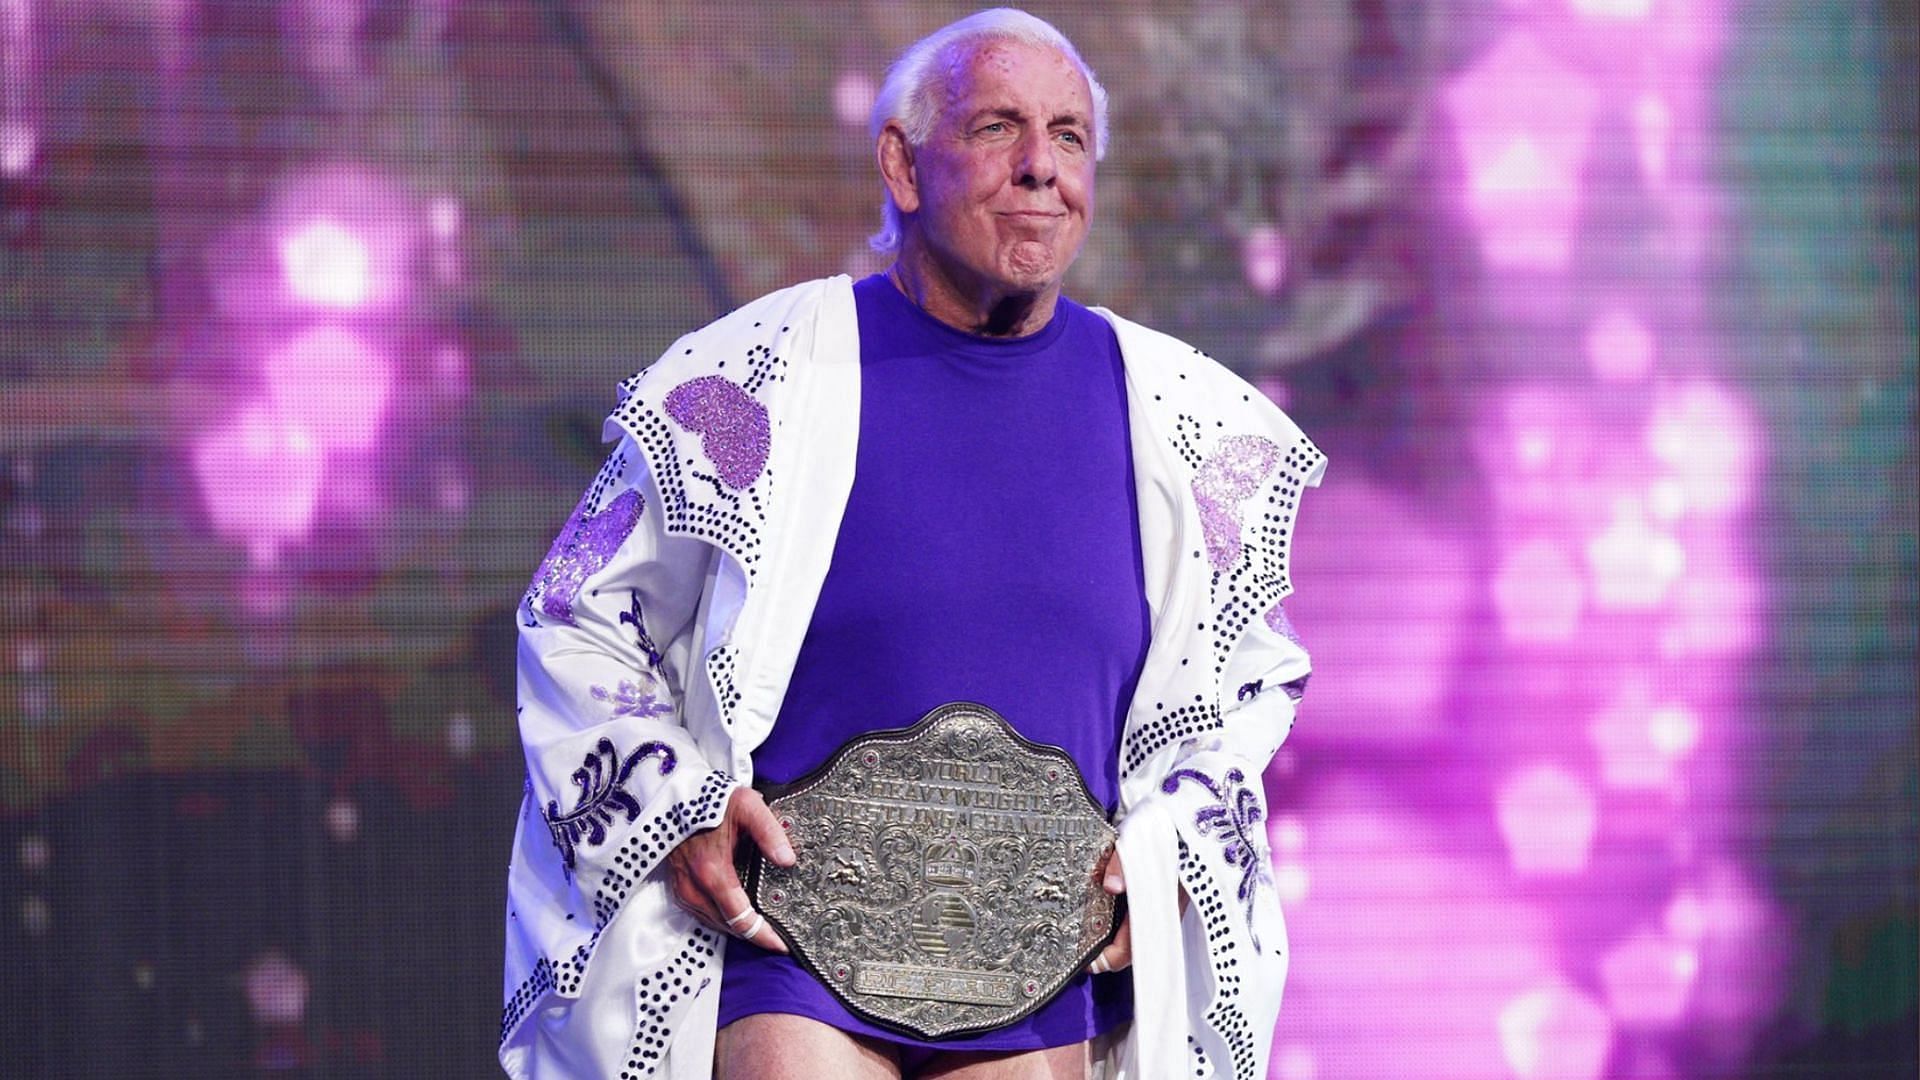 Ric Flair had his last match in July